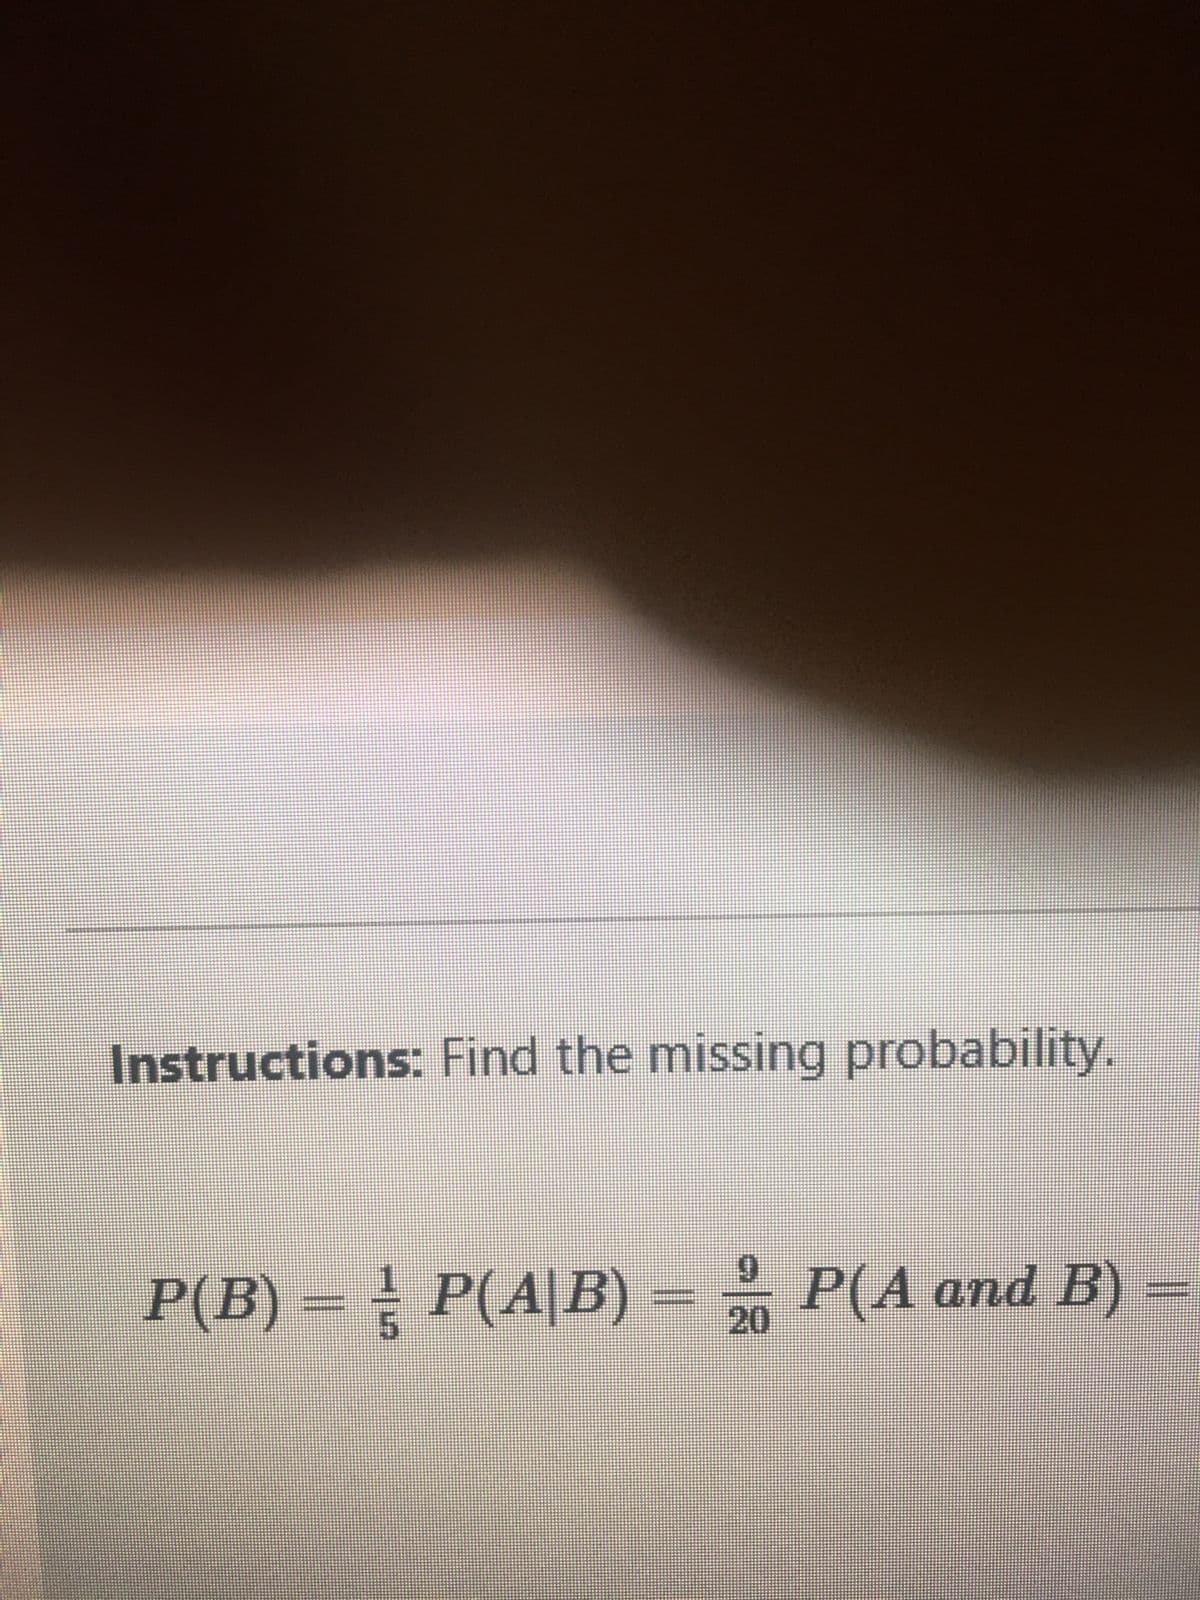 Instructions: Find the missing probability.
P(B) = P(A/B) = 20P(A and B)